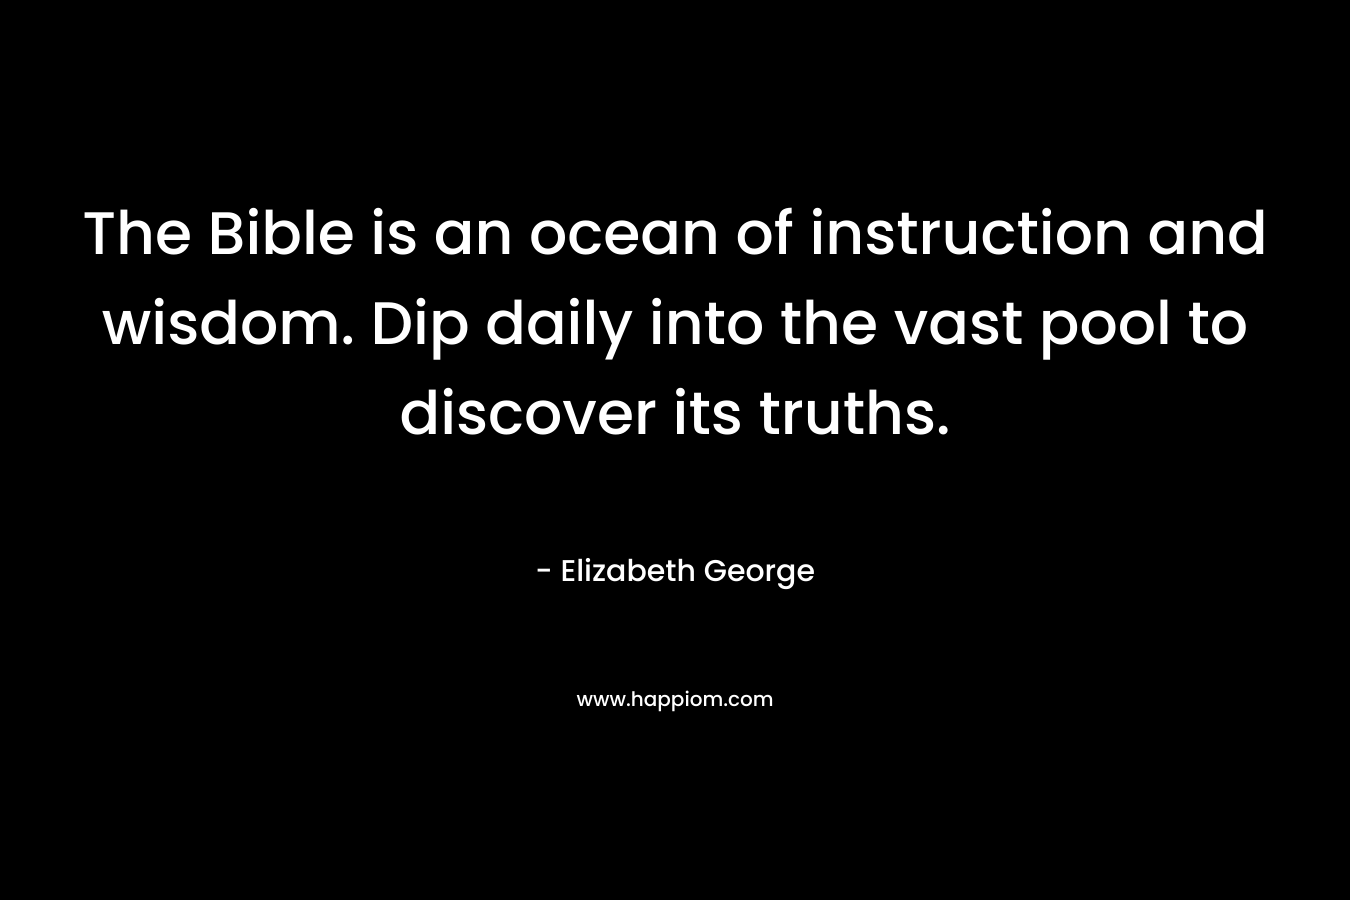 The Bible is an ocean of instruction and wisdom. Dip daily into the vast pool to discover its truths. – Elizabeth George